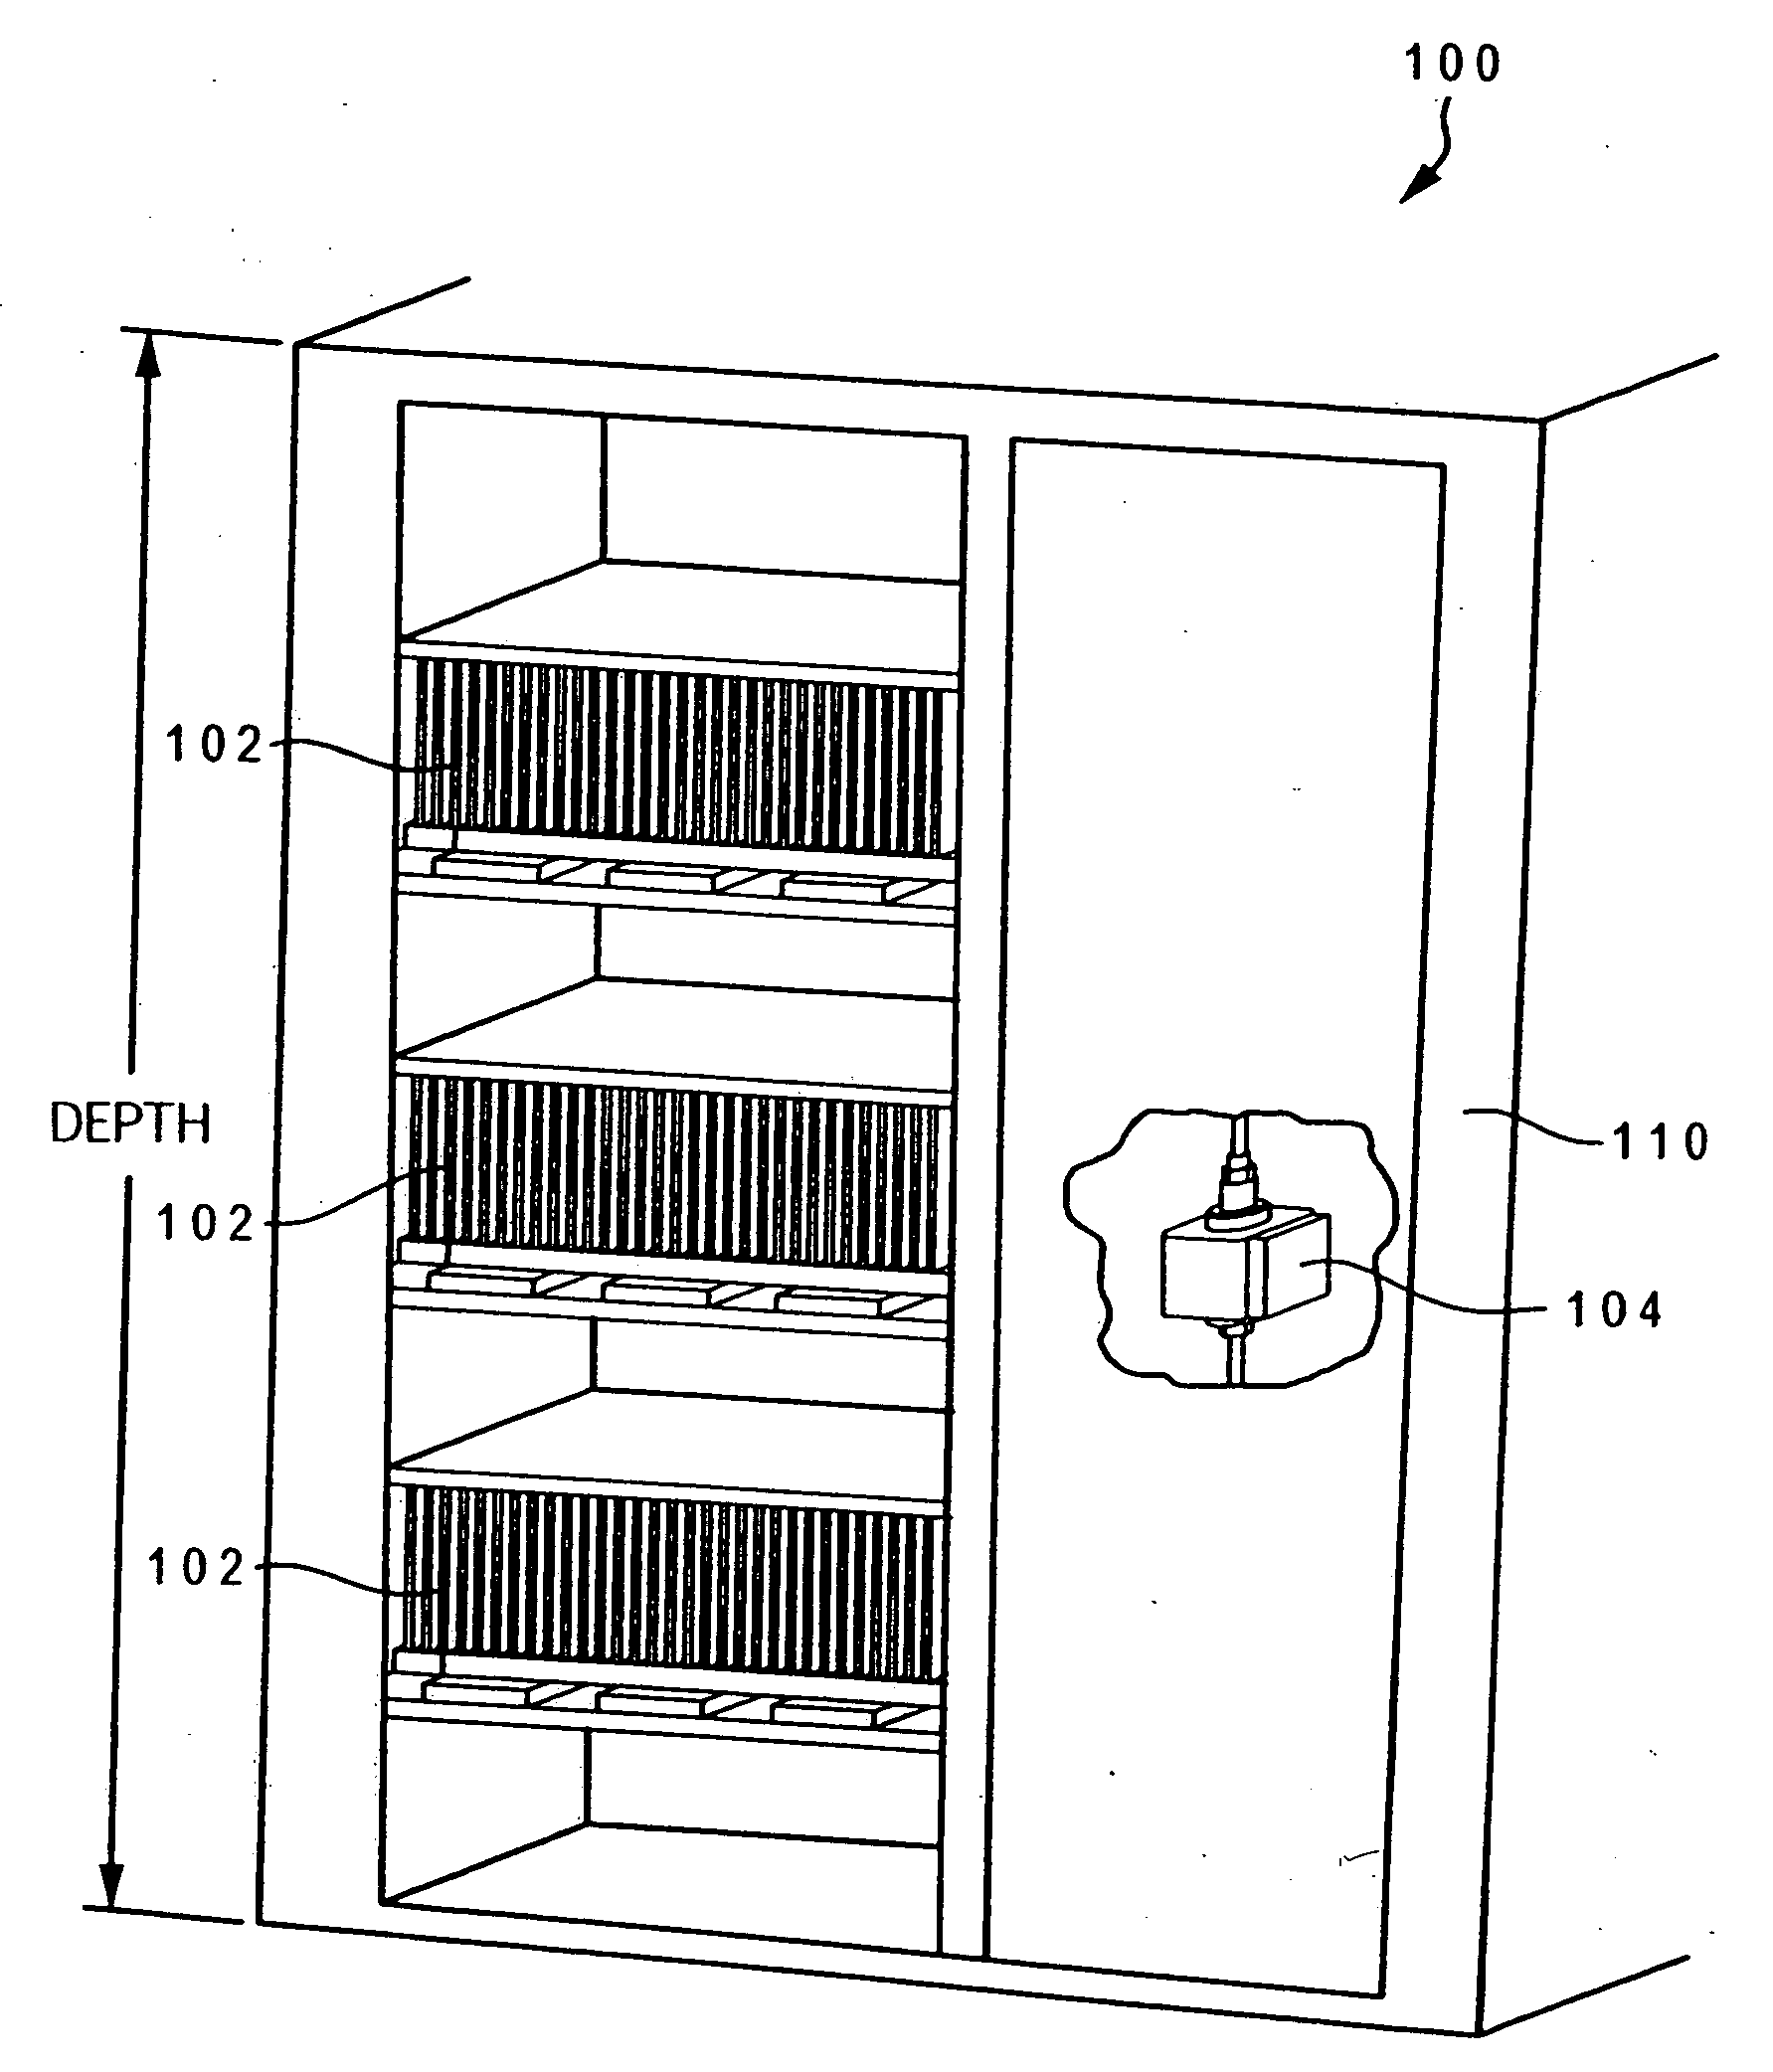 Thermal control system for rack mounting